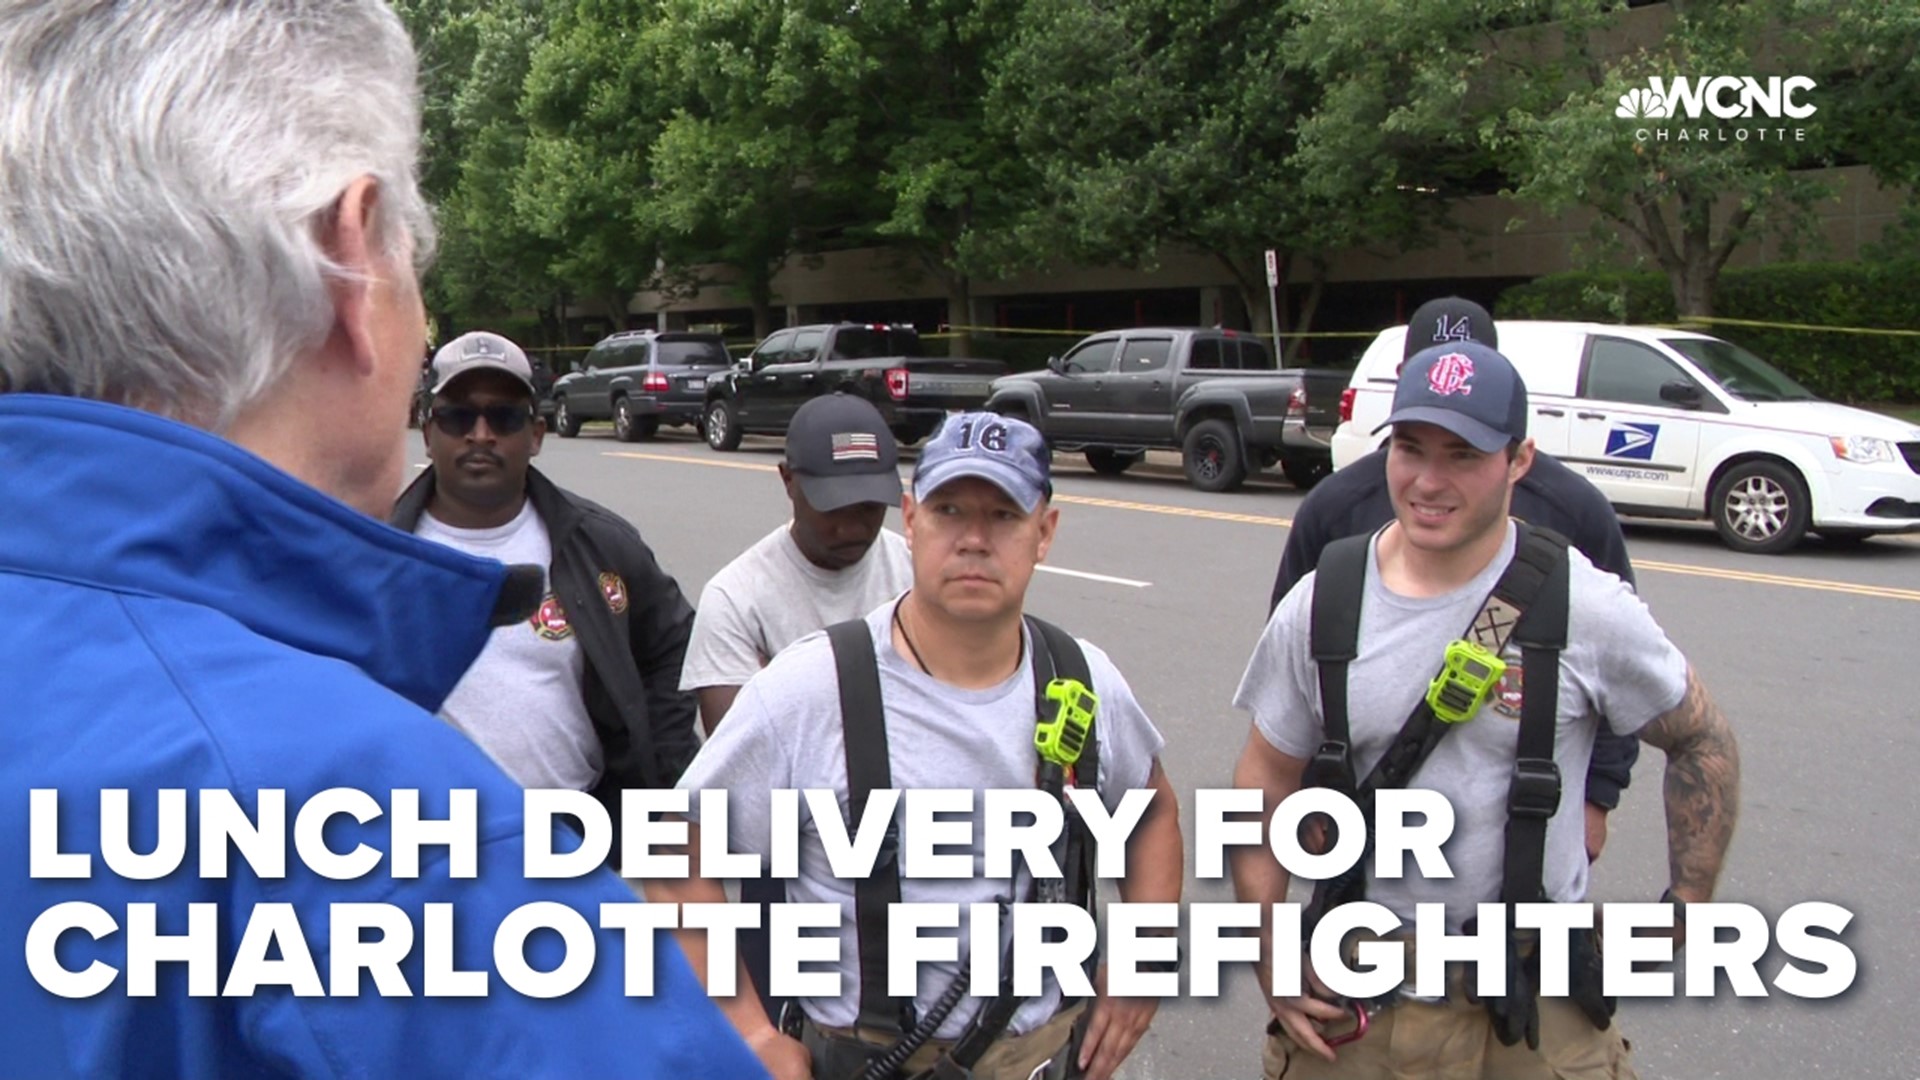 WCNC Charlotte is showing our appreciation to the hard work done by Charlotte firefighters during Thursday's massive fire.